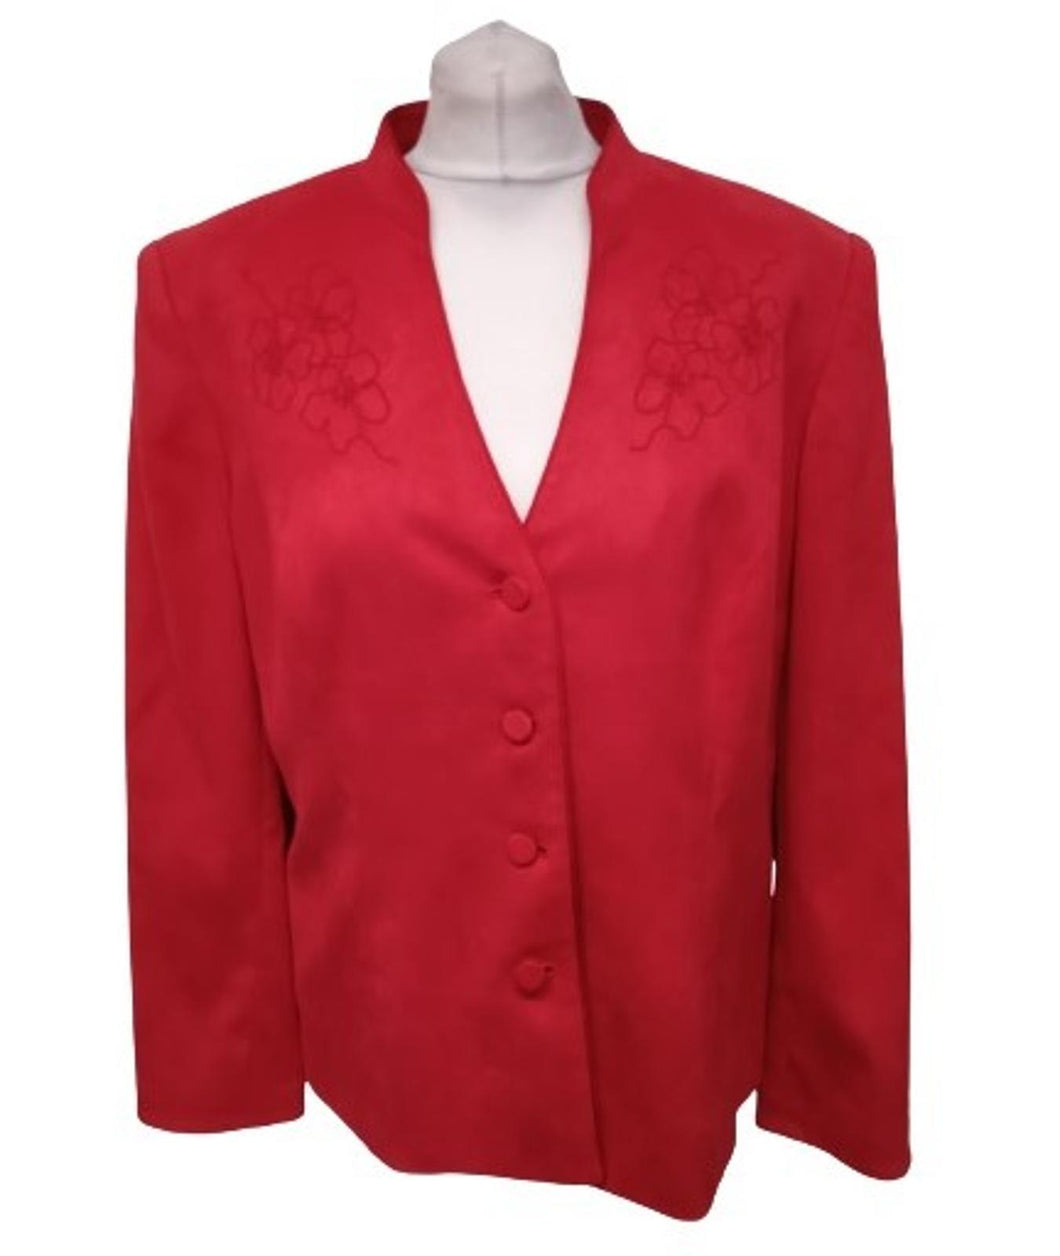 JACQUES VERT Ladies Red Flower Embroidered Single Breasted Jacket Size UK14